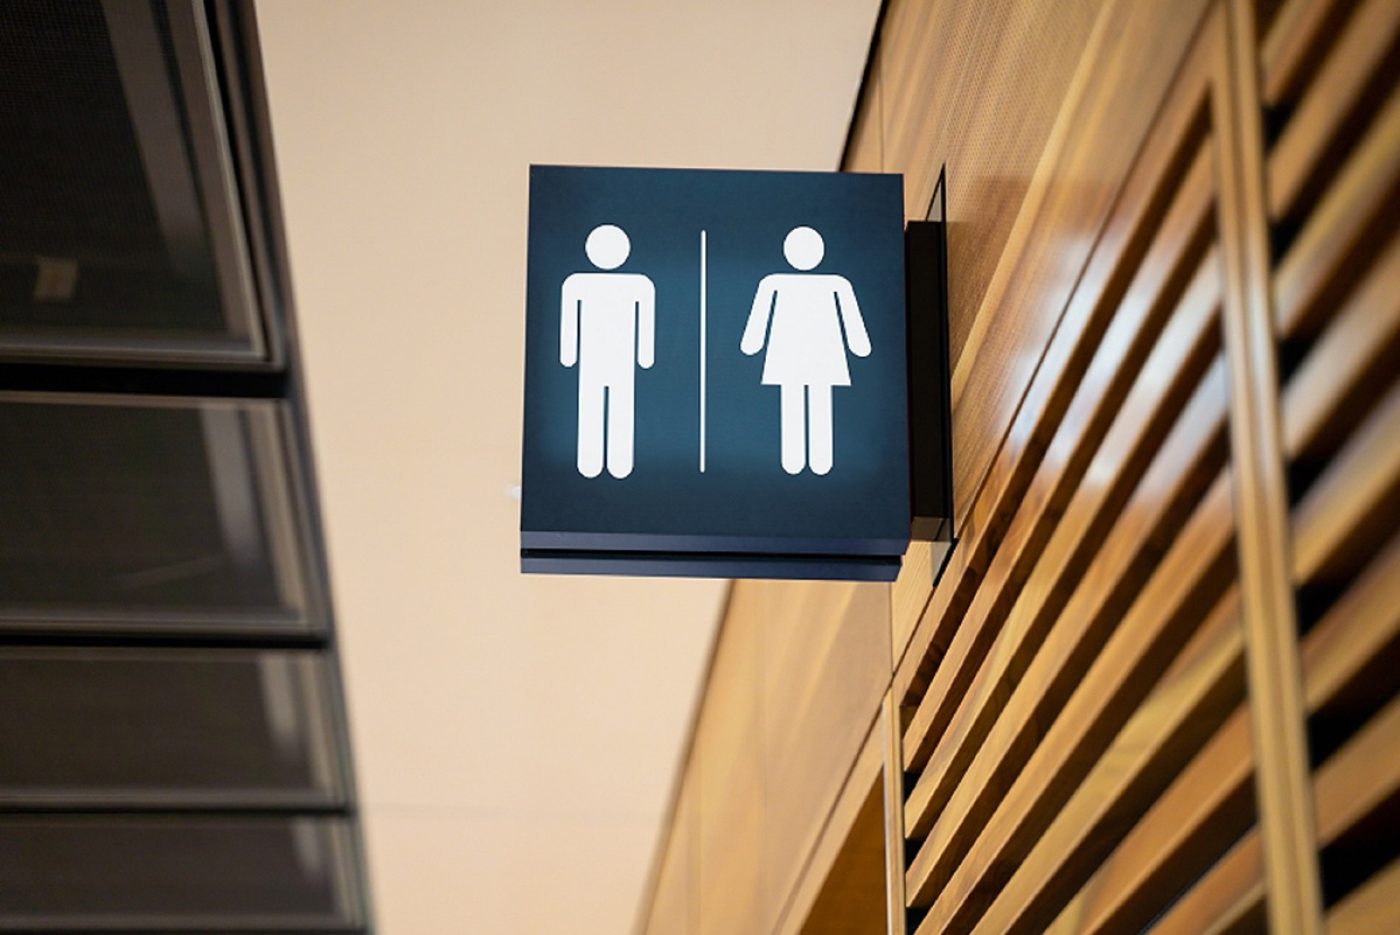 A picture showing male and female bathroom icons.